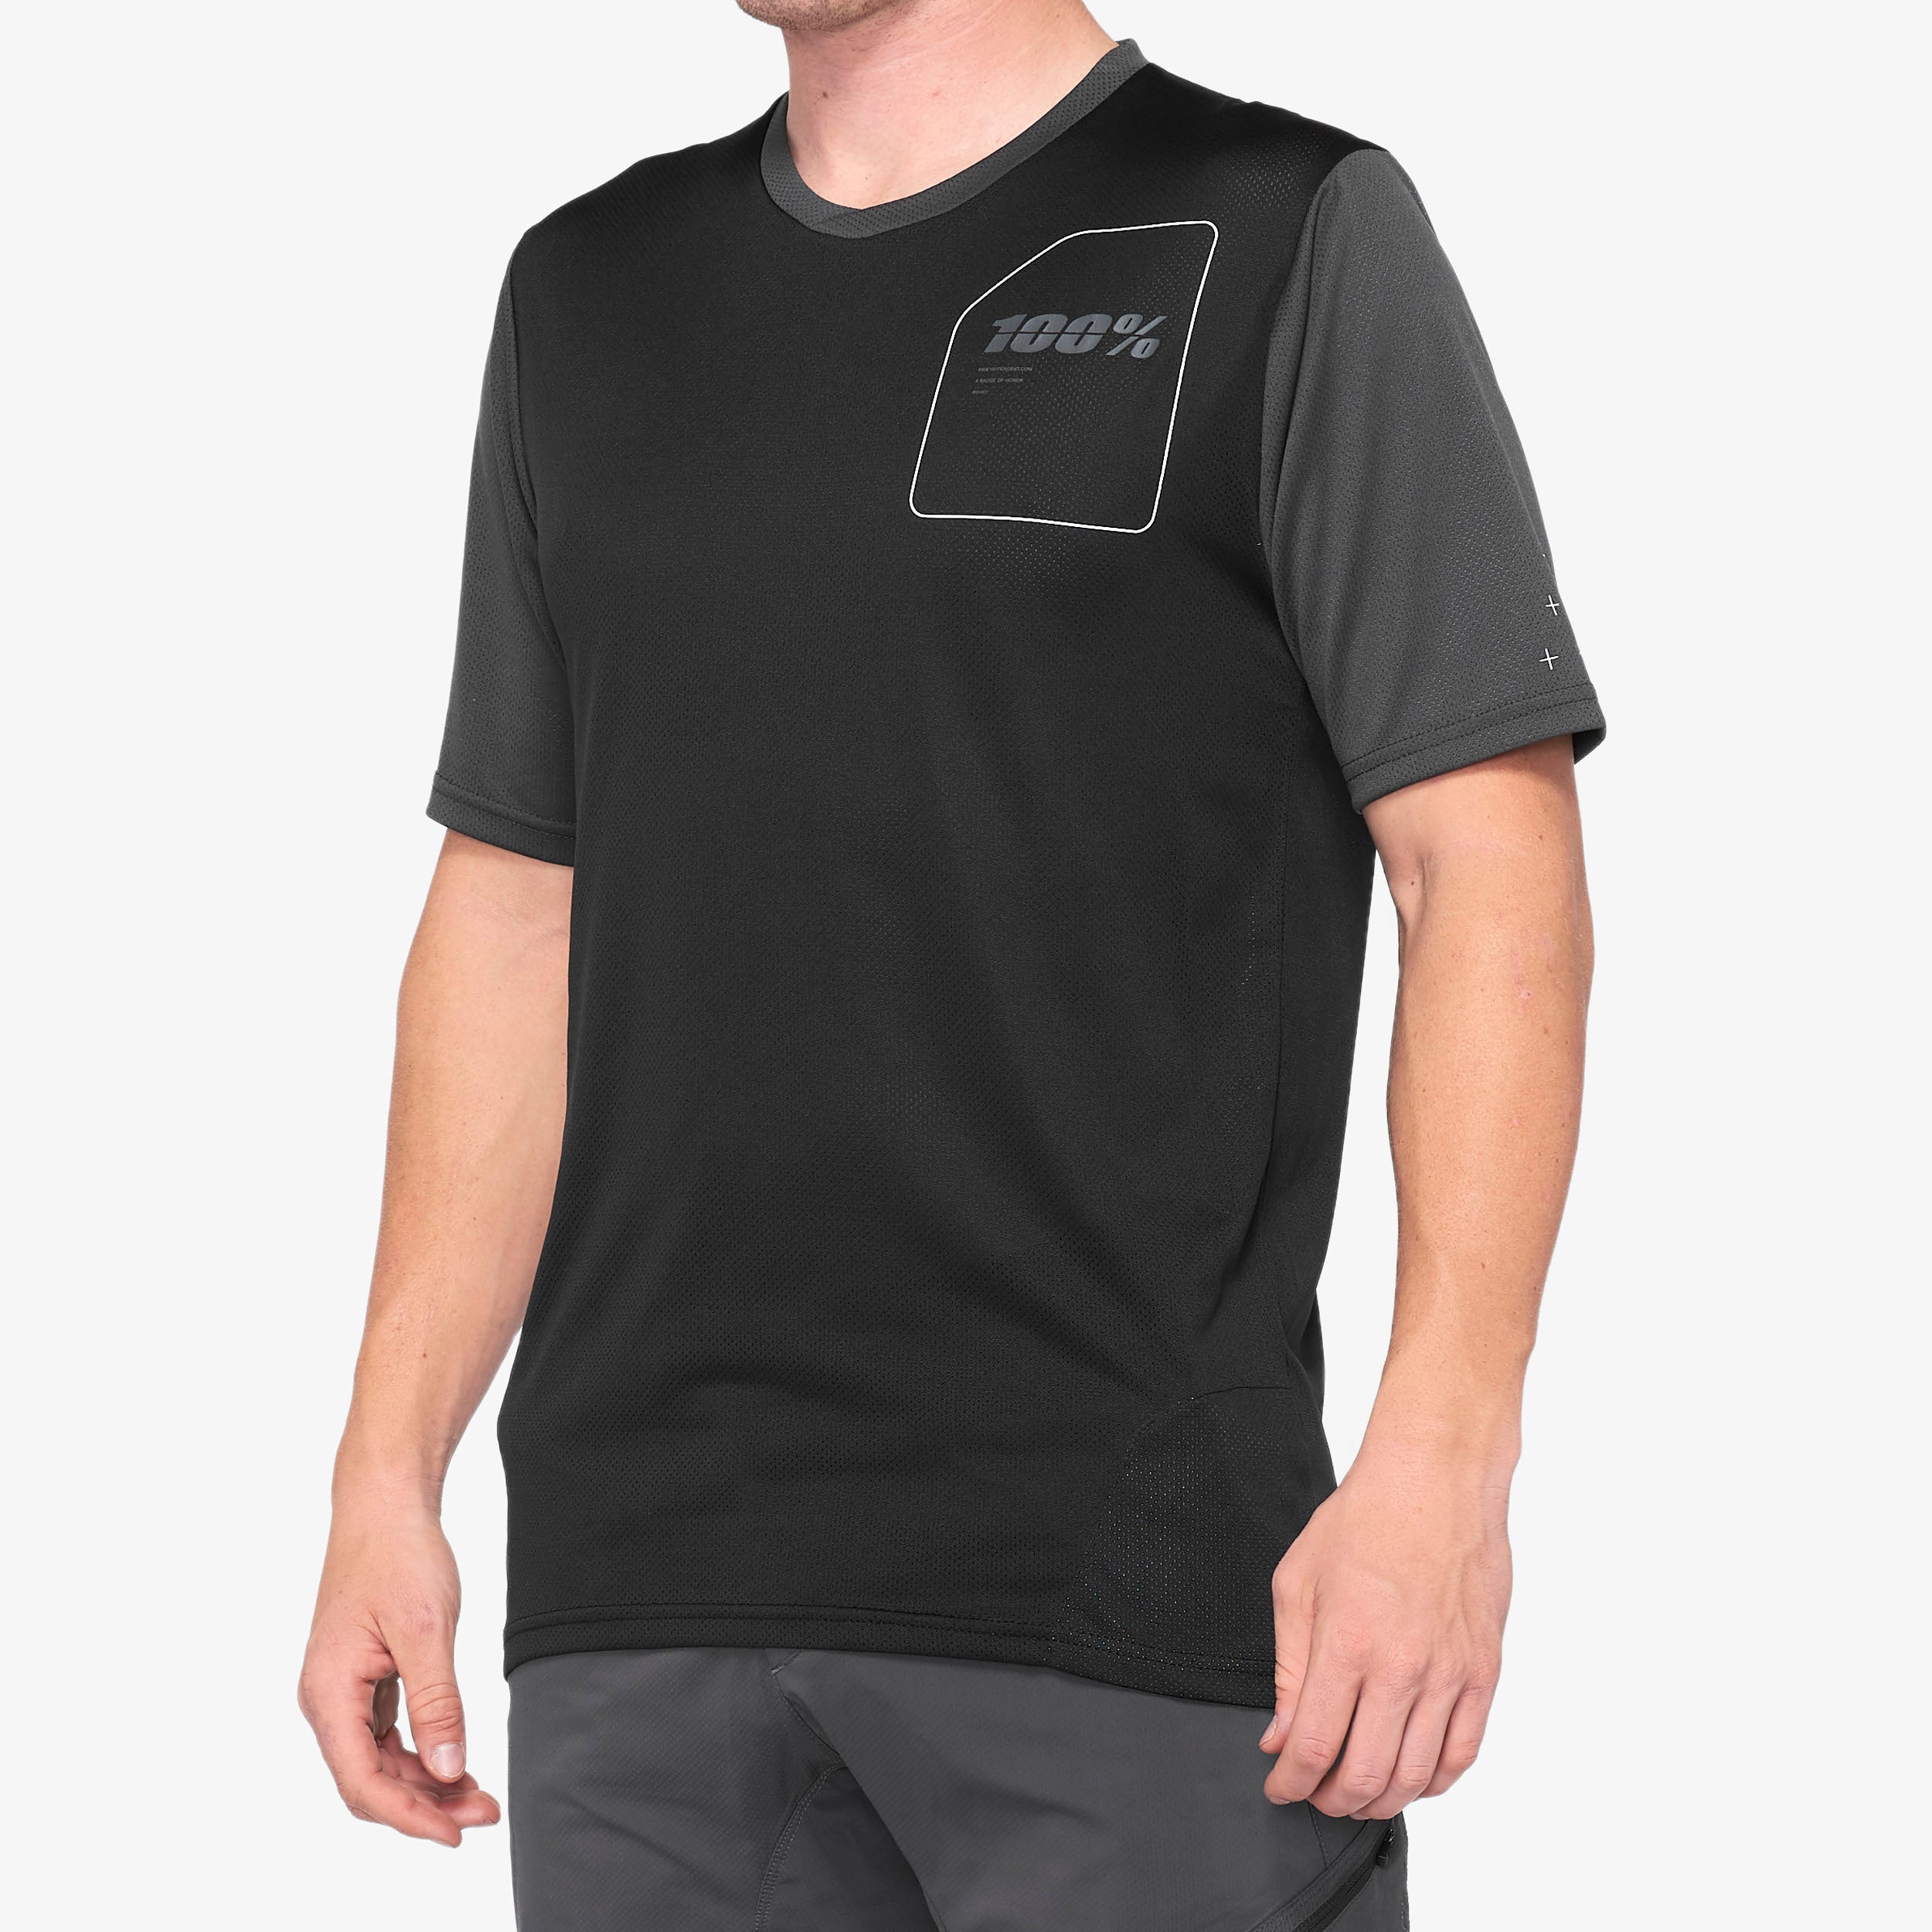 RIDECAMP Short Sleeve Jersey Black/Charcoal